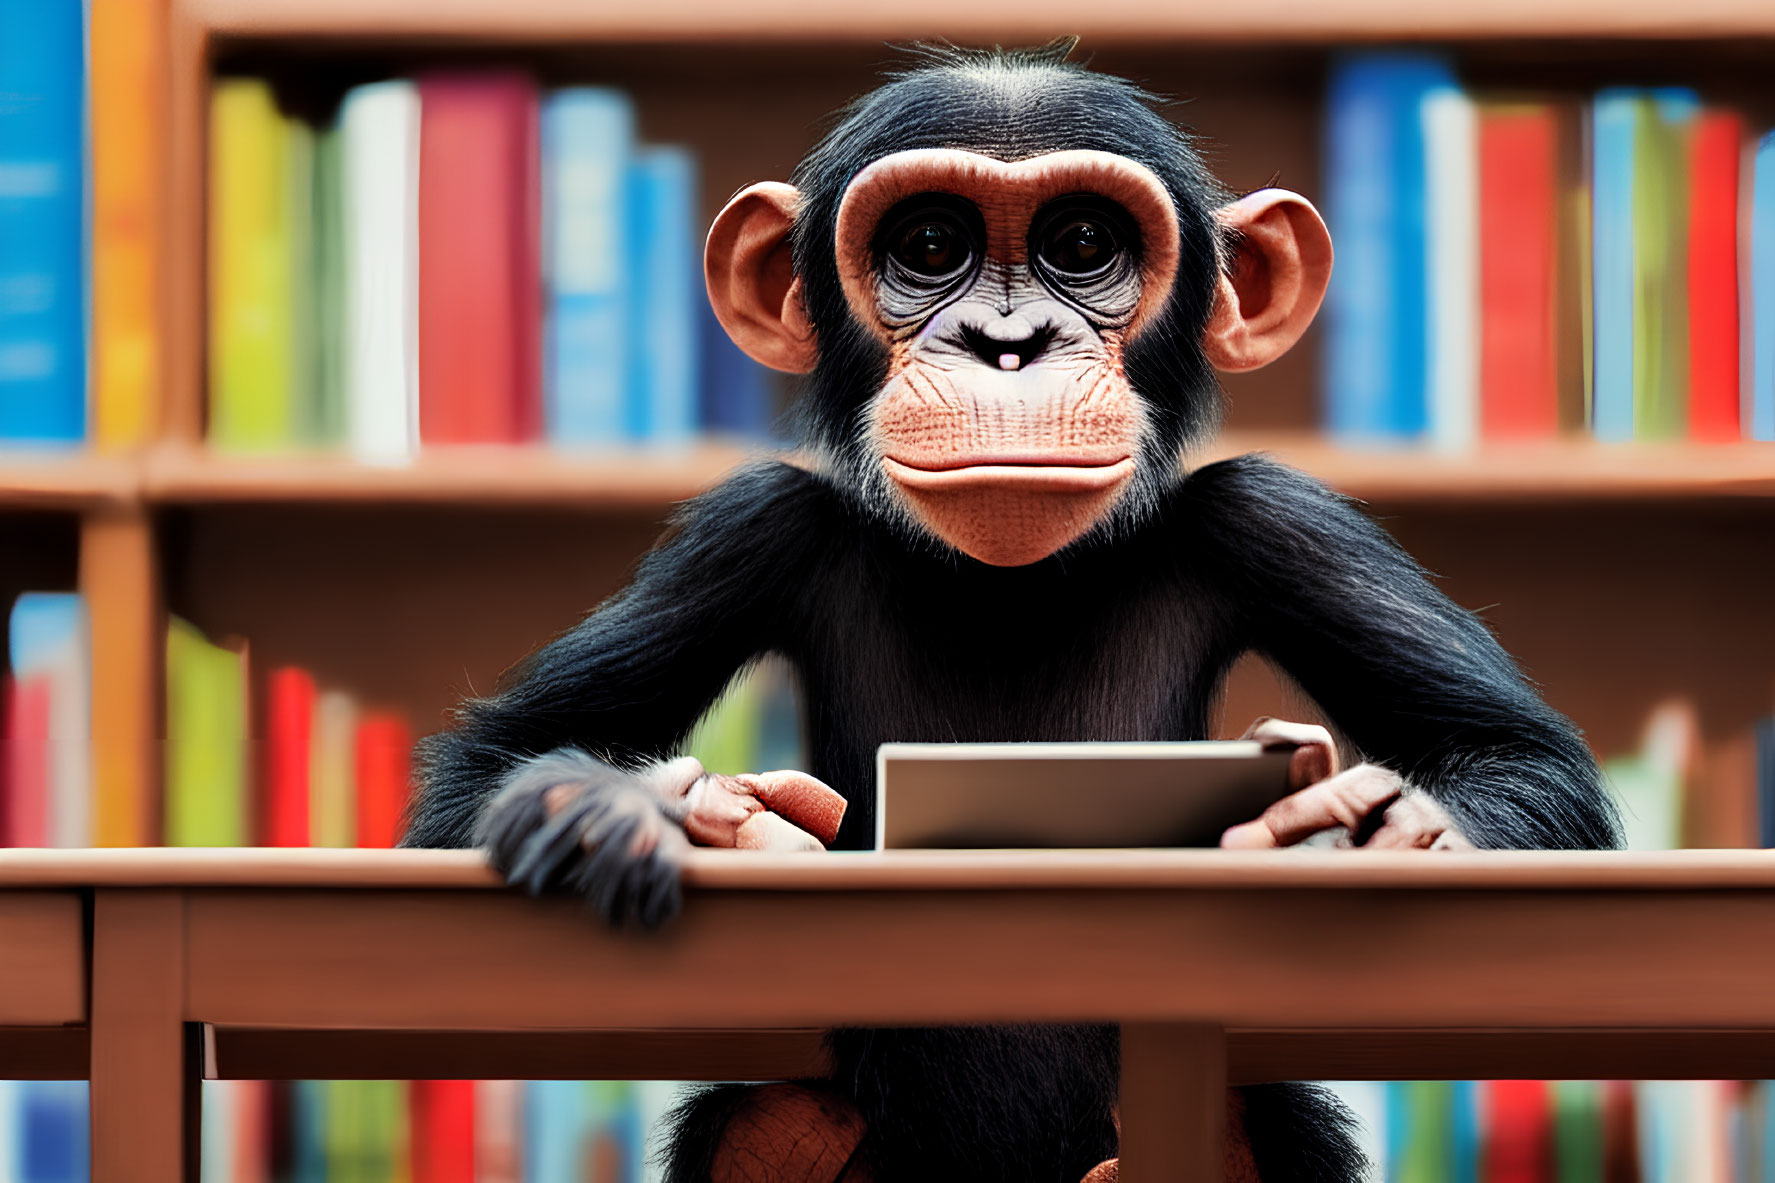 Young chimpanzee using digital tablet at desk with colorful bookshelves